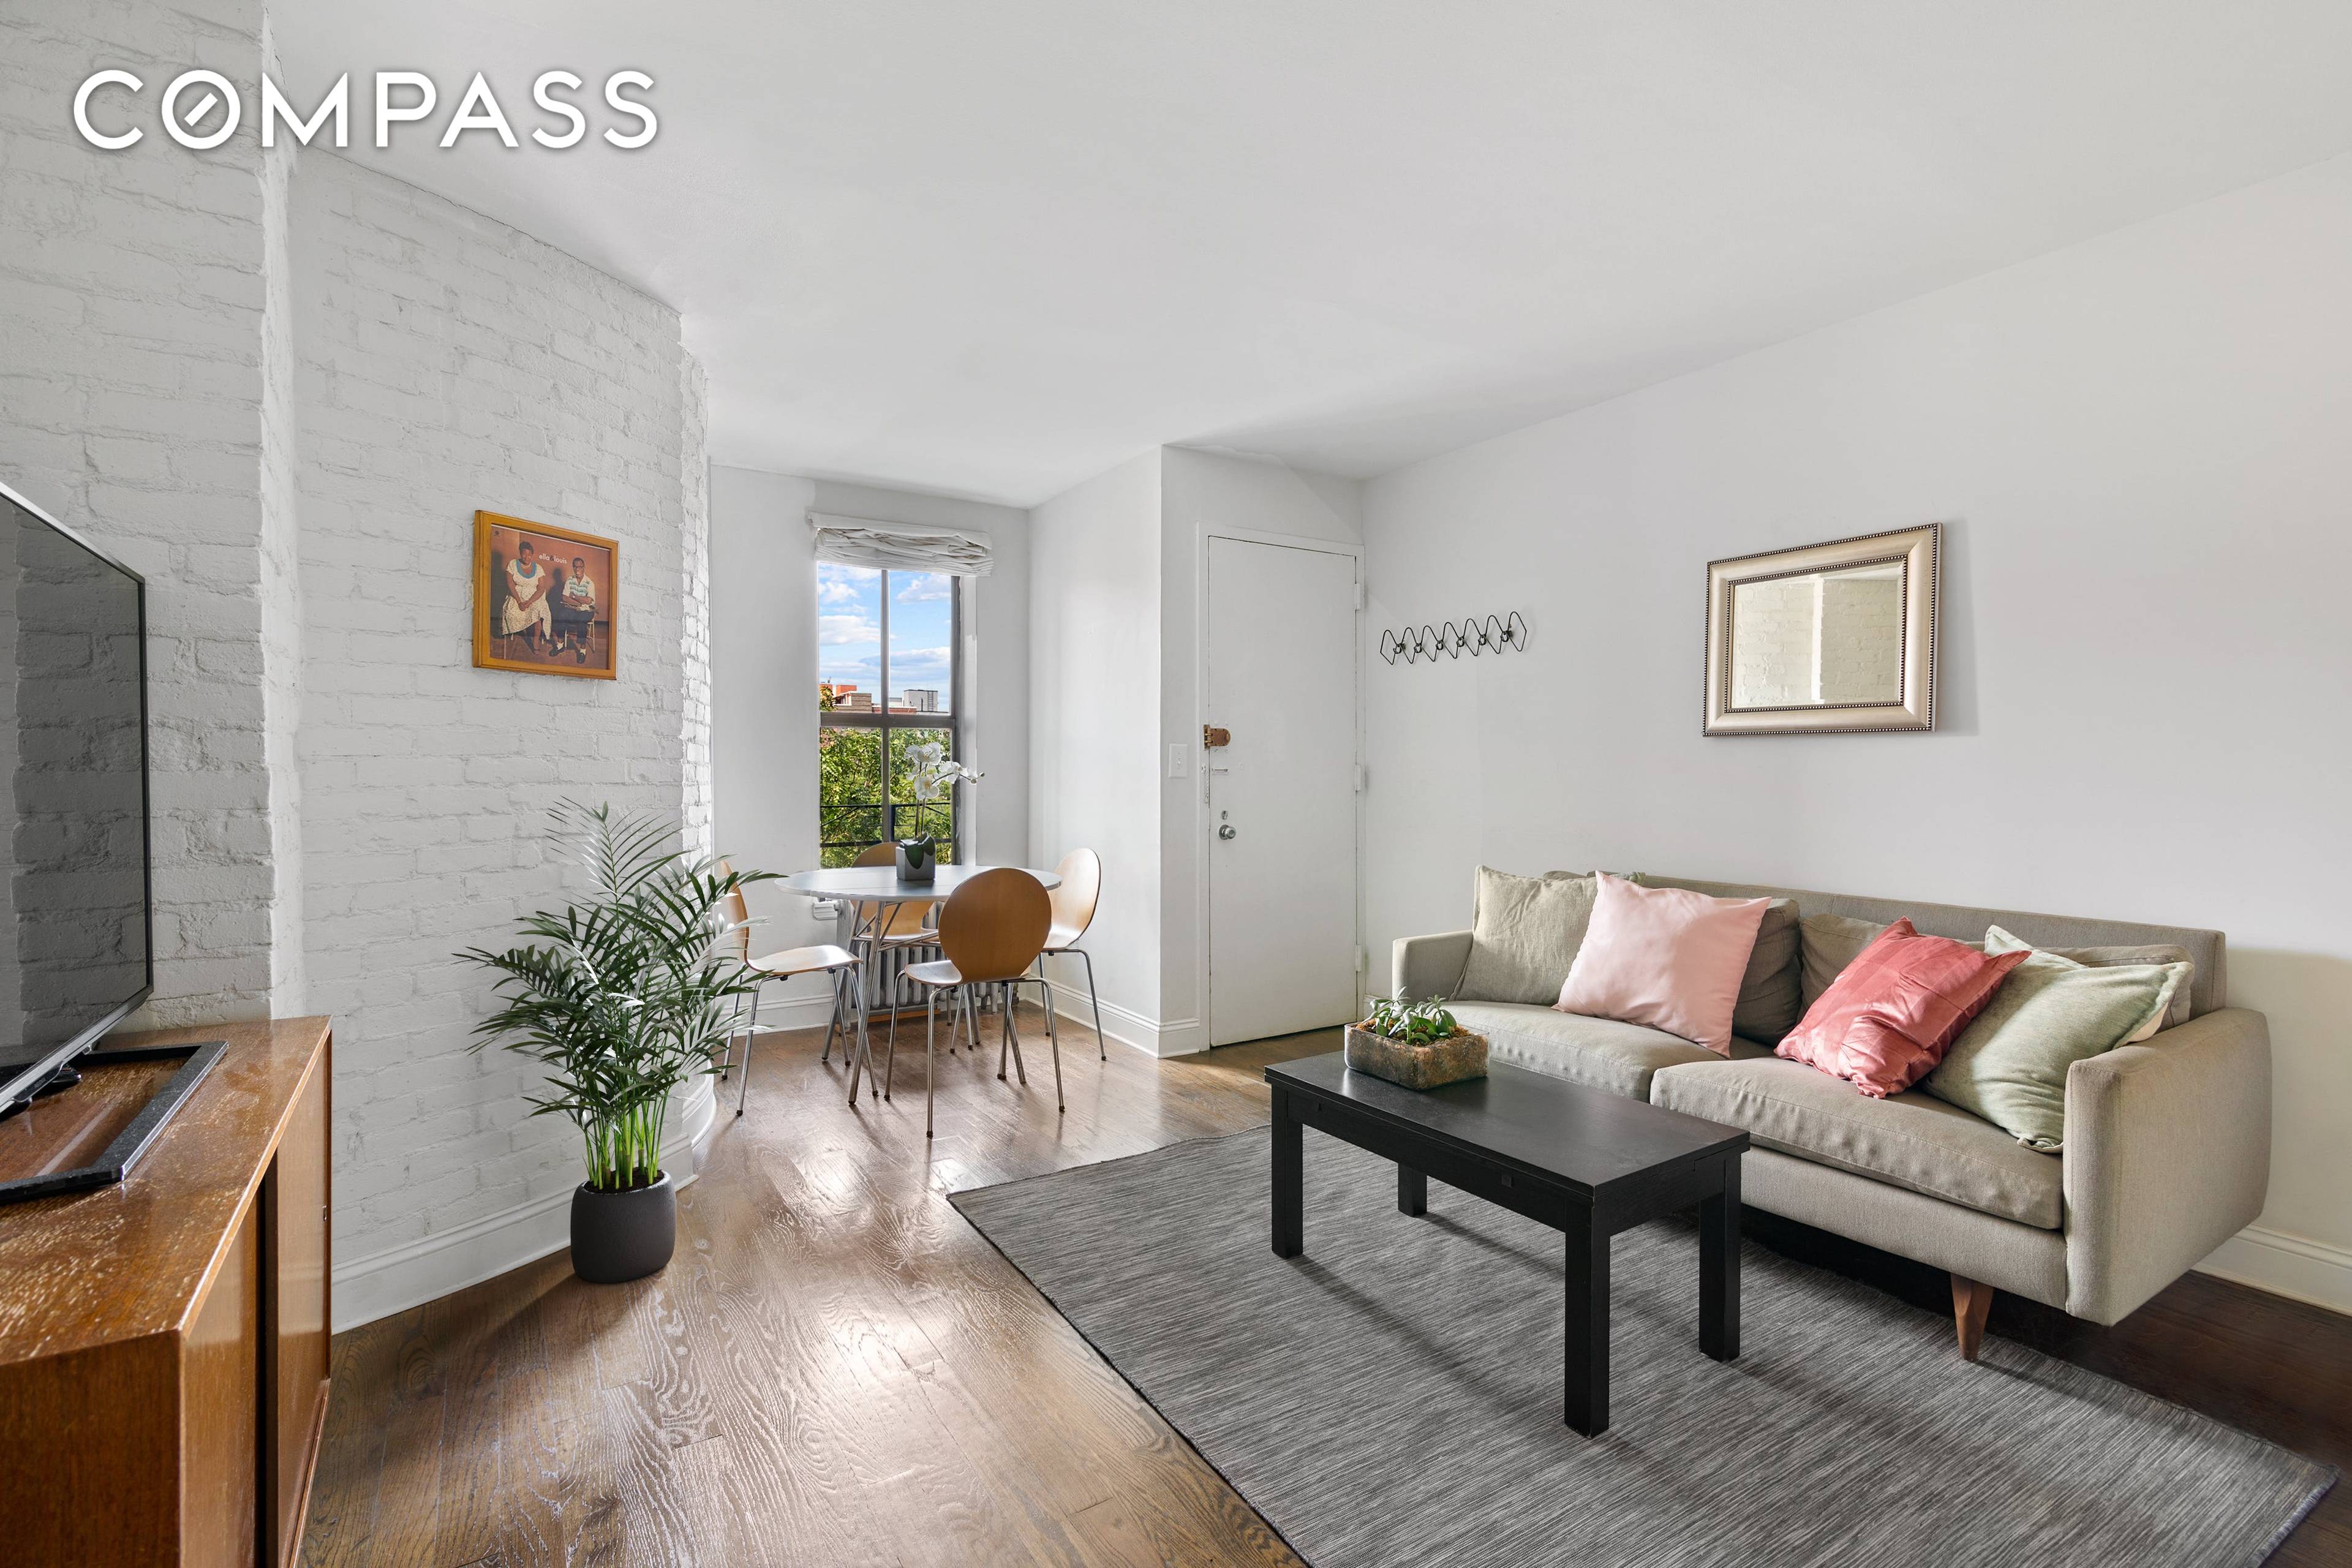 This spacious and modern 1 BD I BA condo offers sophisticated, easy living in the iconic Cobble Hill Towers, a prewar building community with wonderful amenities like an expansive green ...